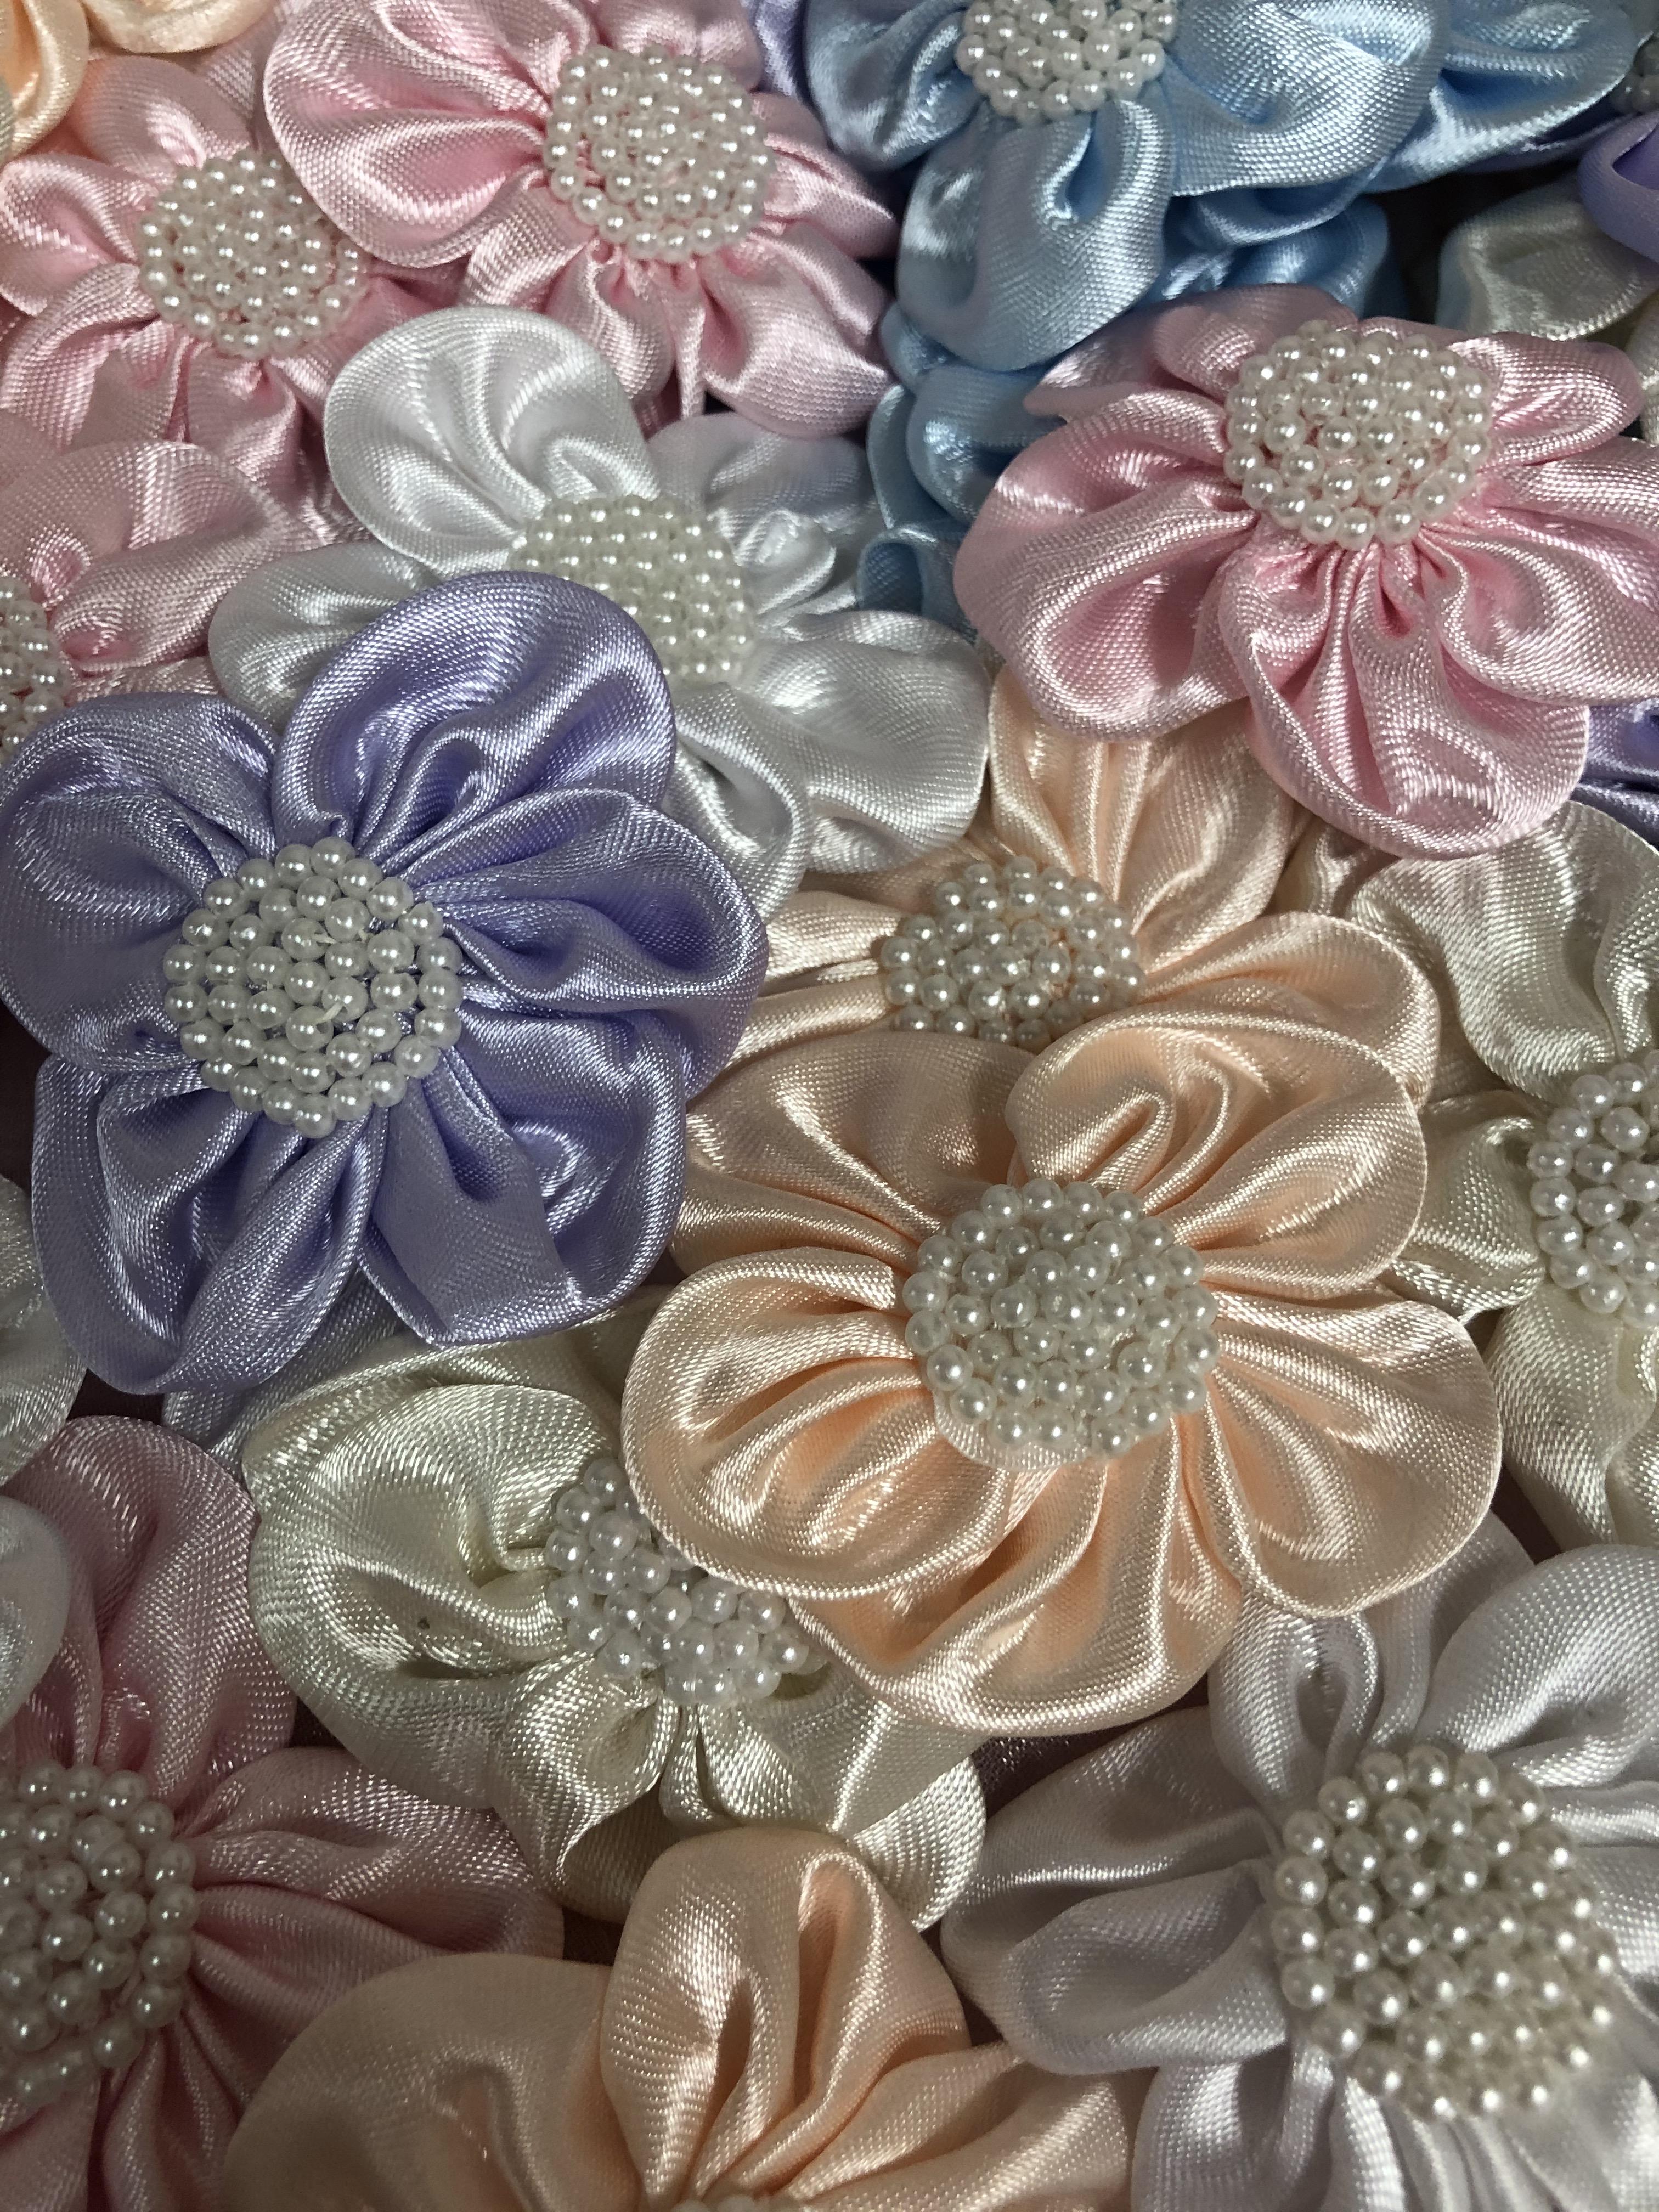 CHARMED 2 1/4" Satin W/ Pearls Flowers Arts Crafts DIY Applique 50 pieces - image 2 of 3